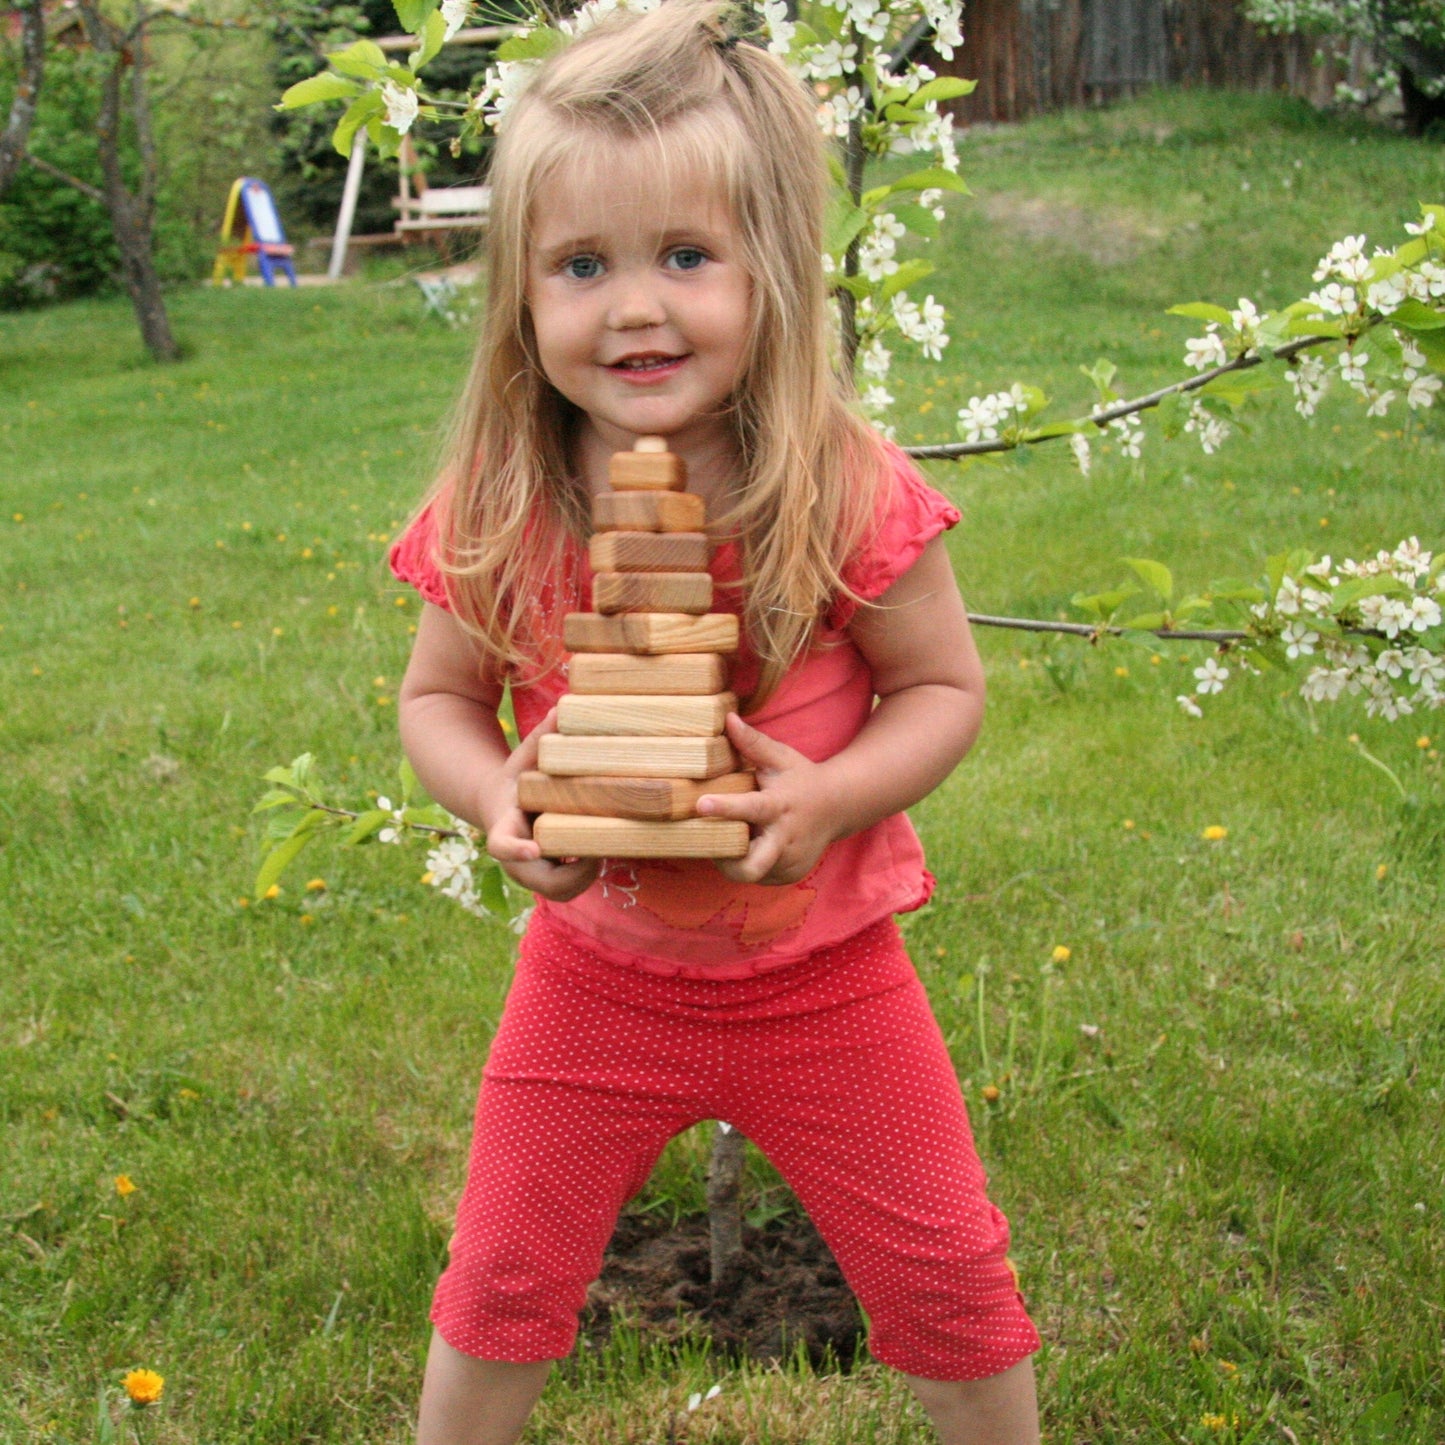 Lotes Toys Natural Square Wooden Stacking Pyramid - 10 pieces PY01